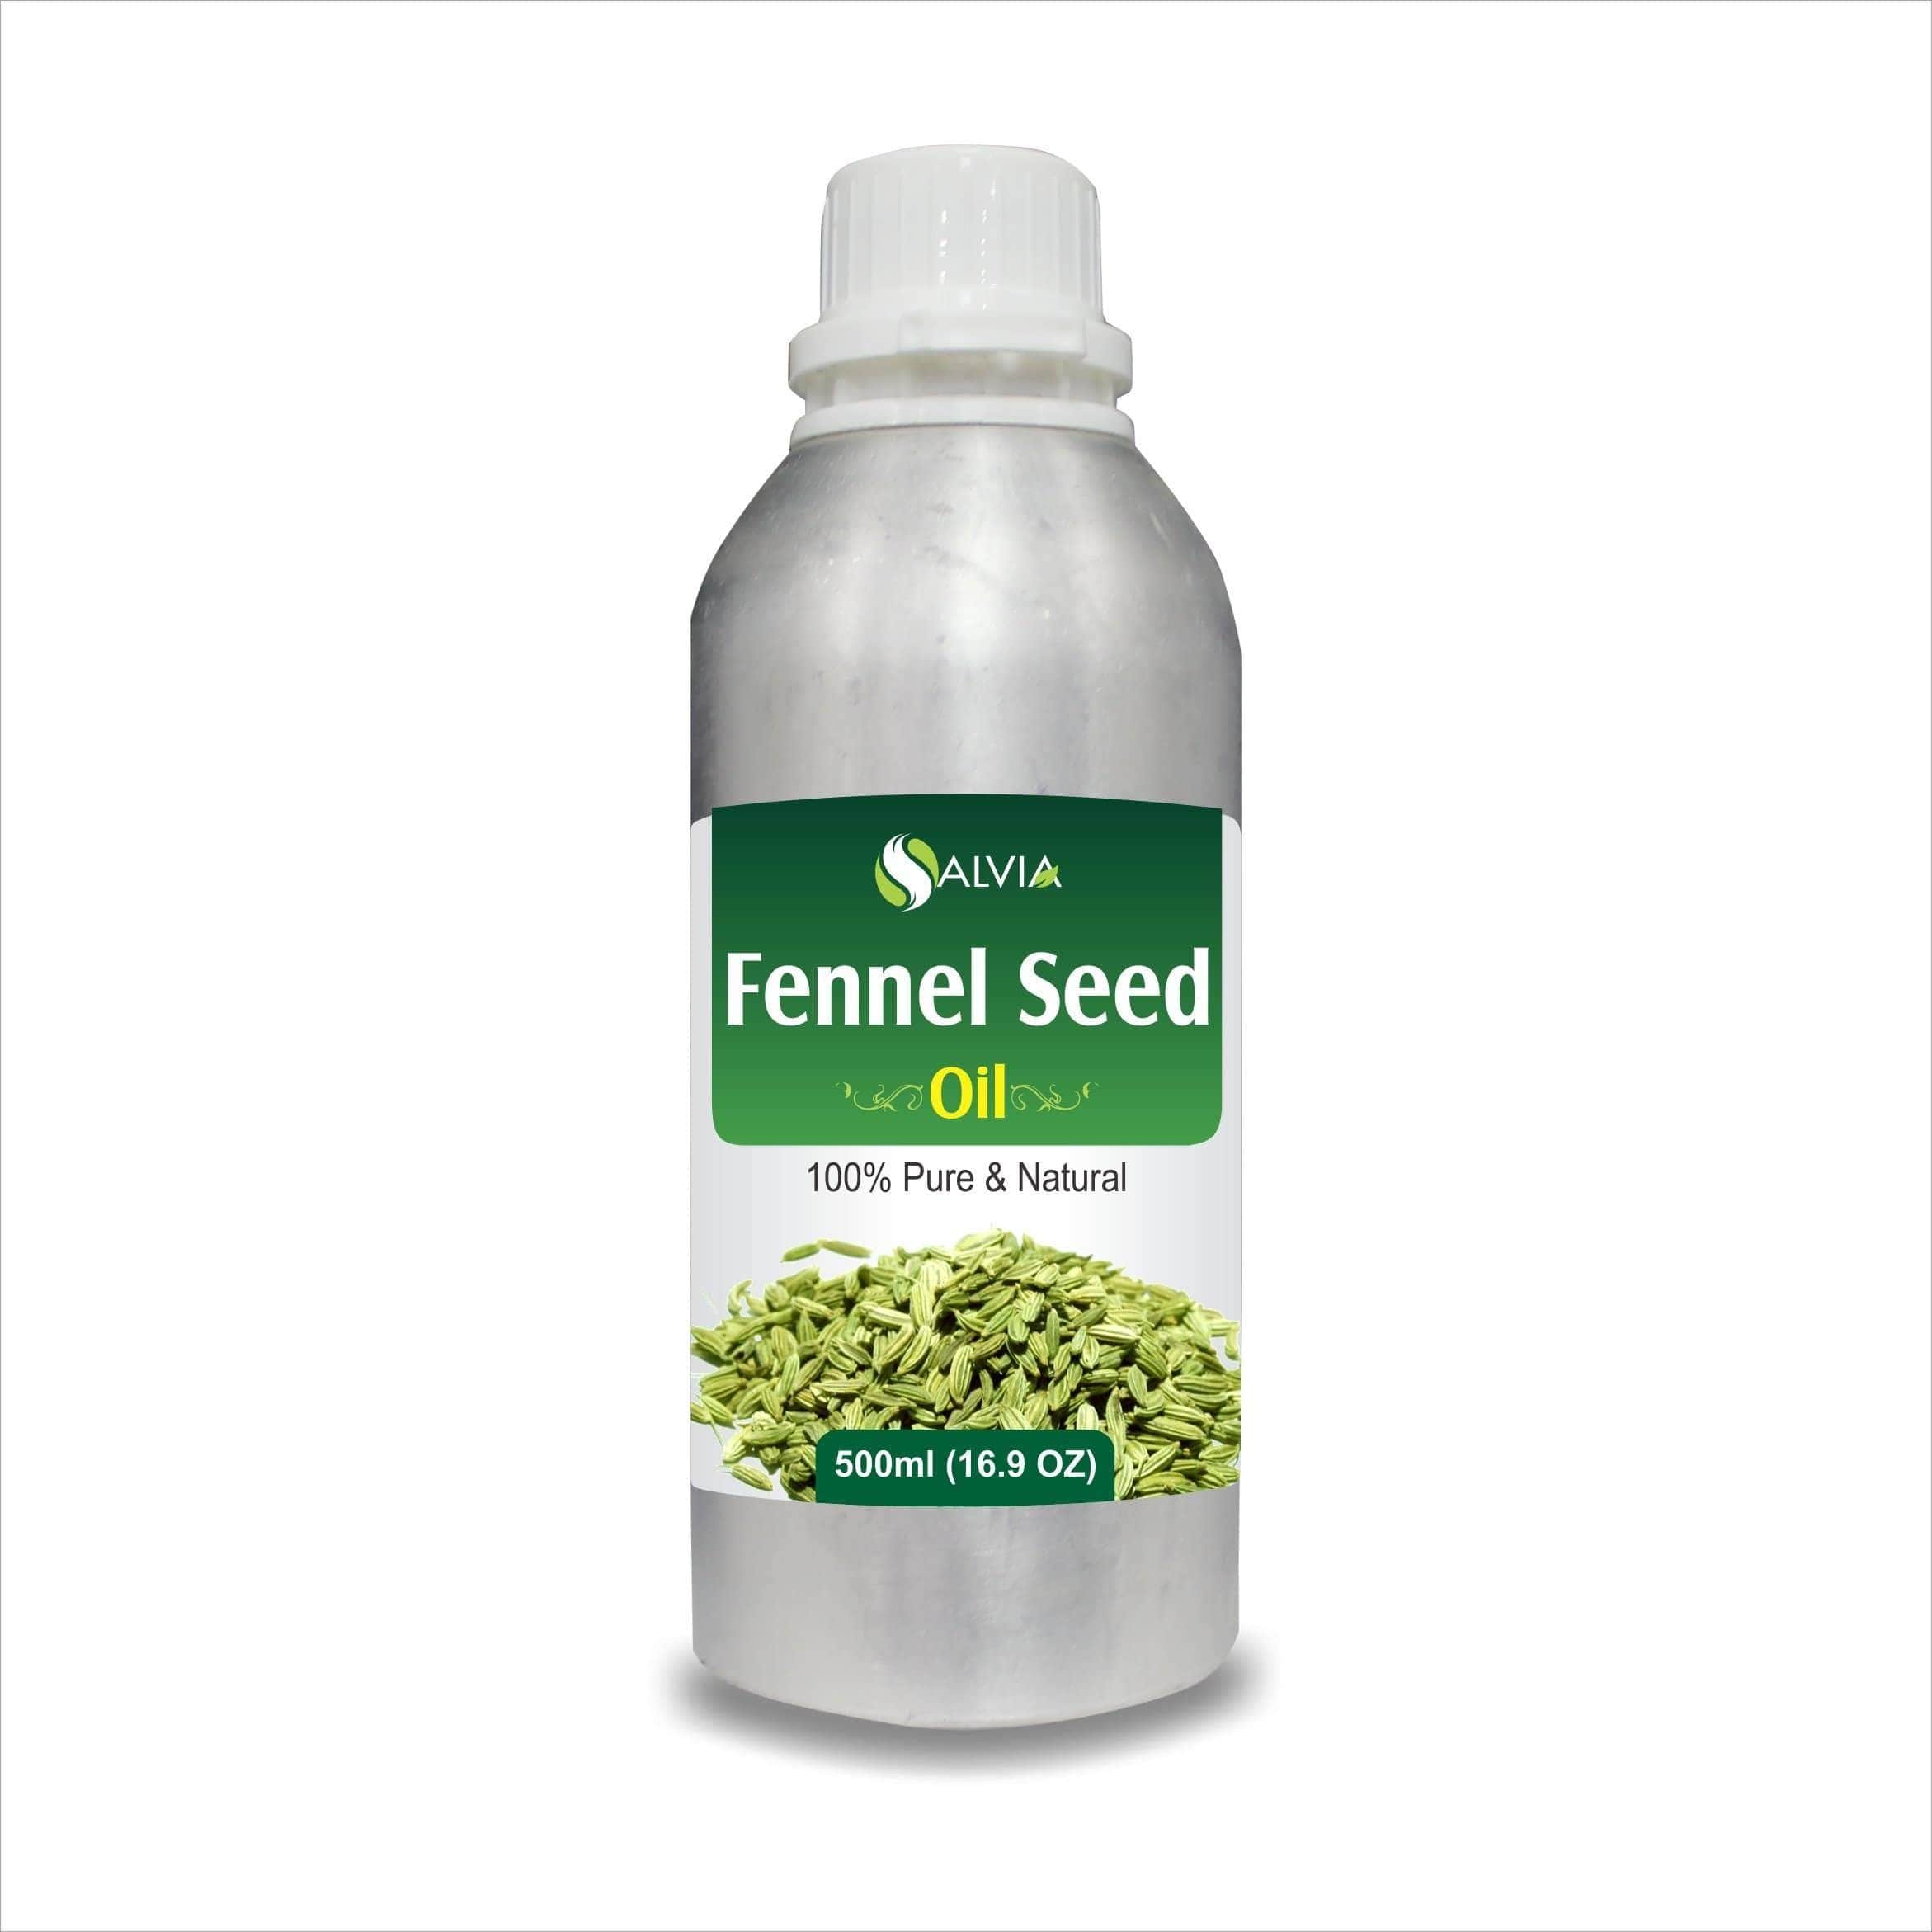 fennel seed oil benefits